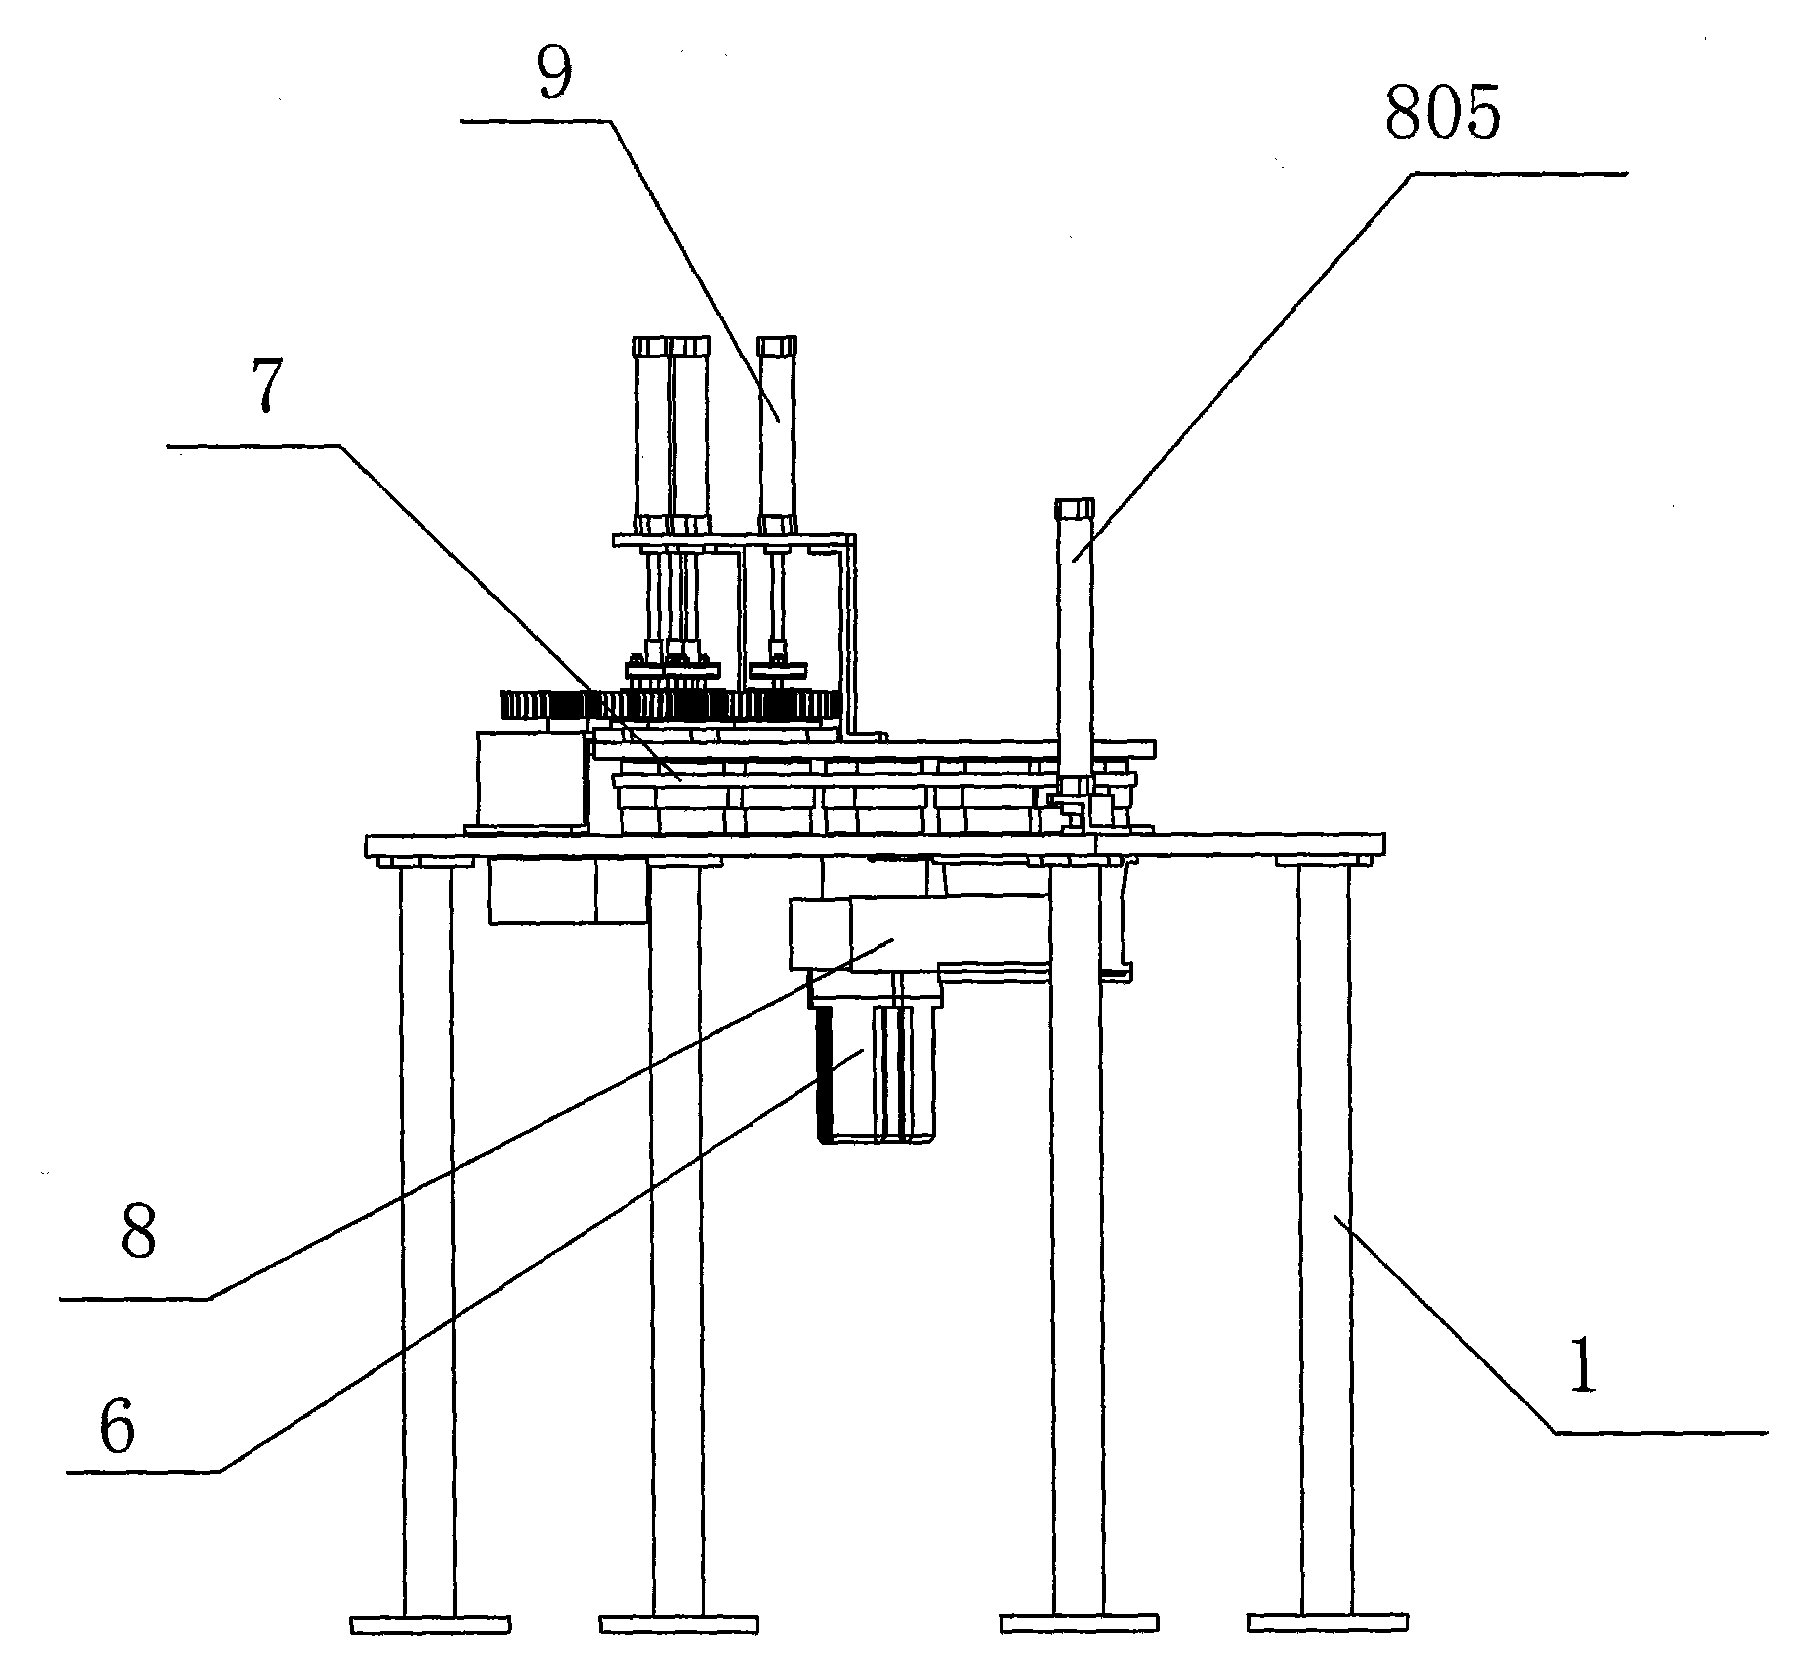 Fish-roe packaging feeding device and method